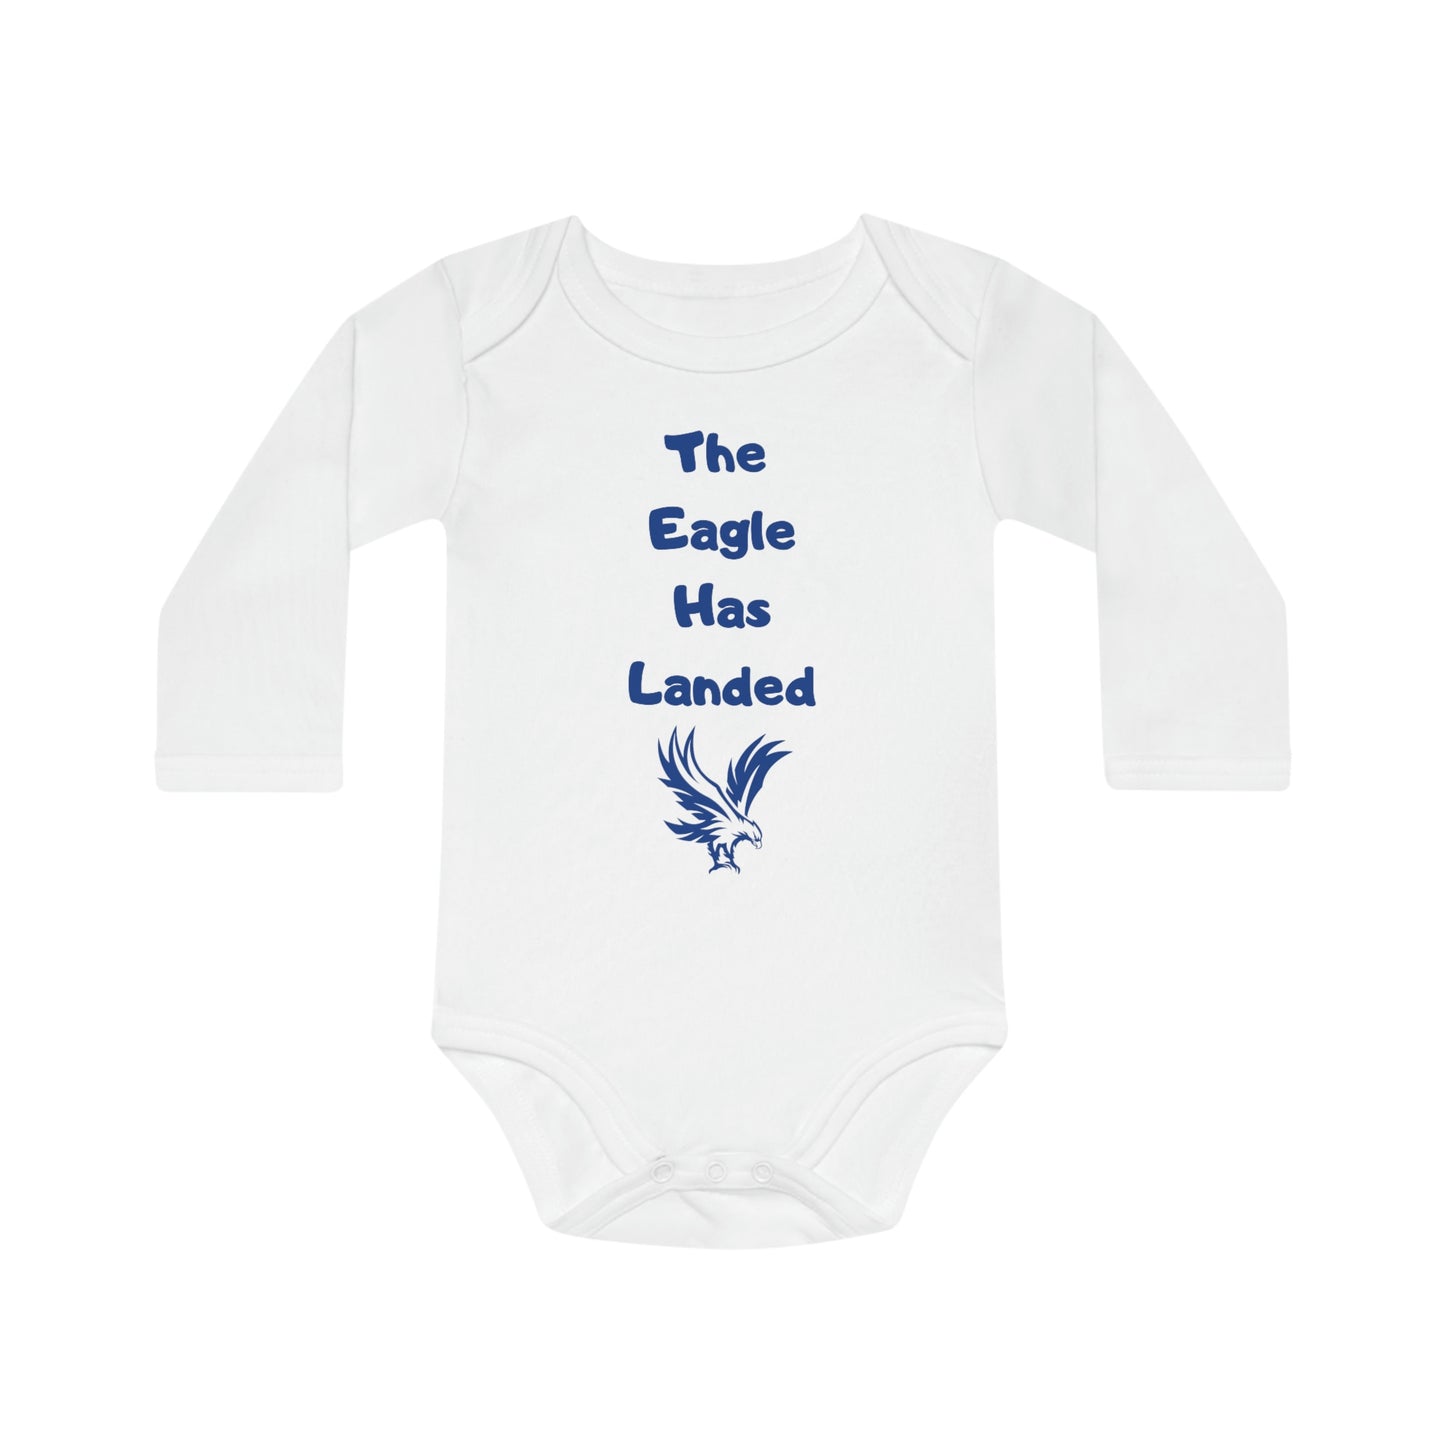 The Eagle Has Landed - Crystal Palace Supporter Body